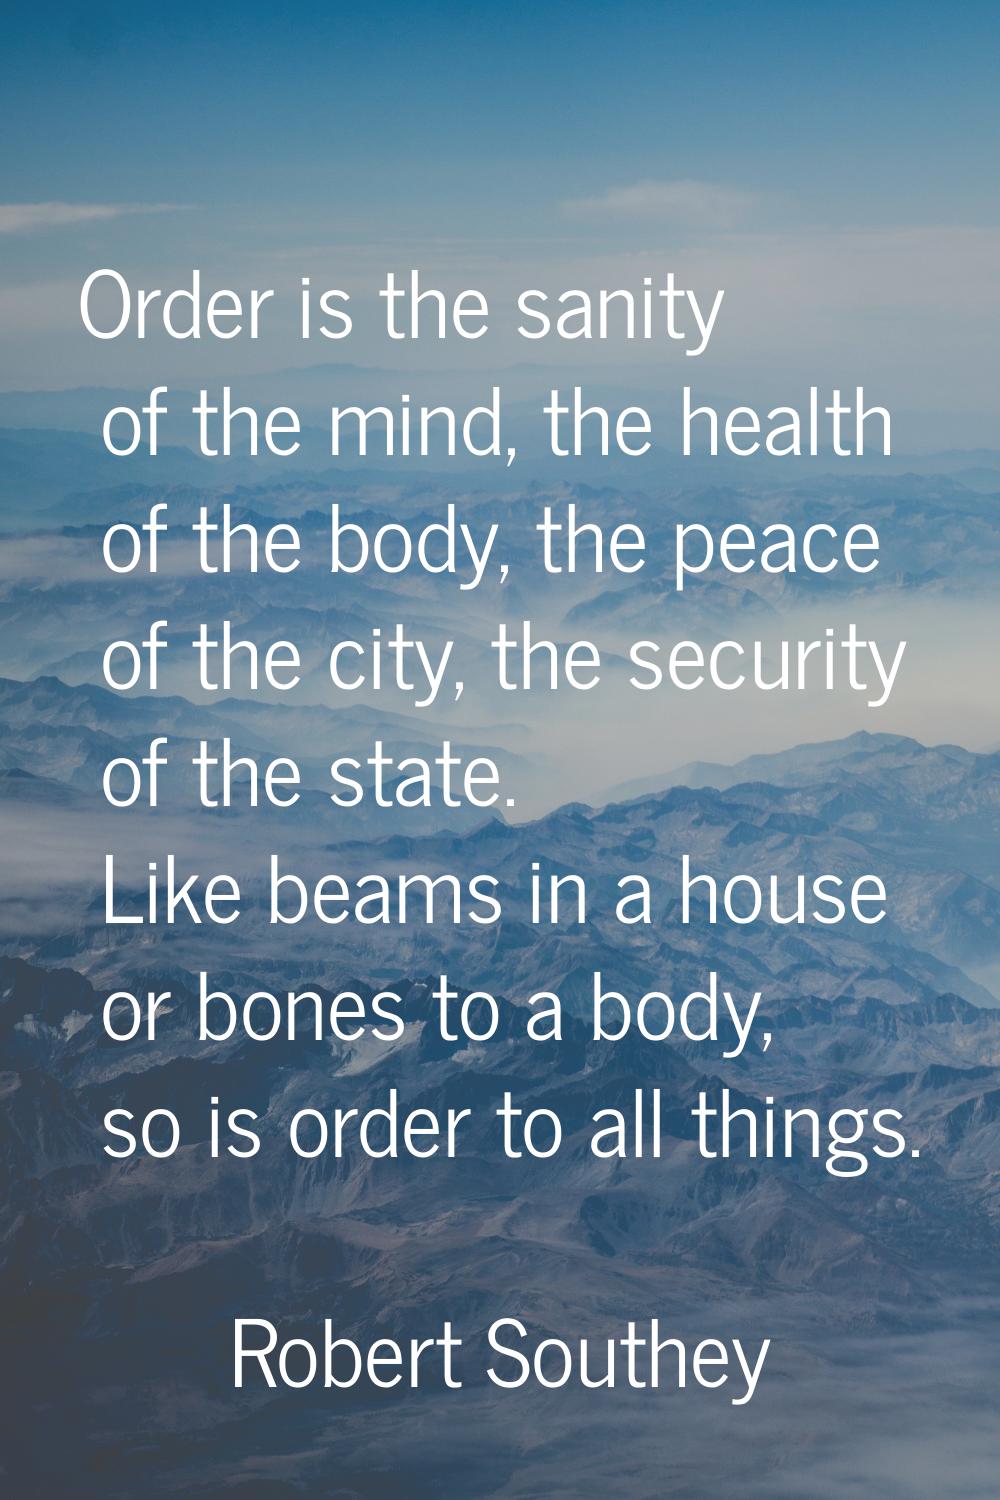 Order is the sanity of the mind, the health of the body, the peace of the city, the security of the